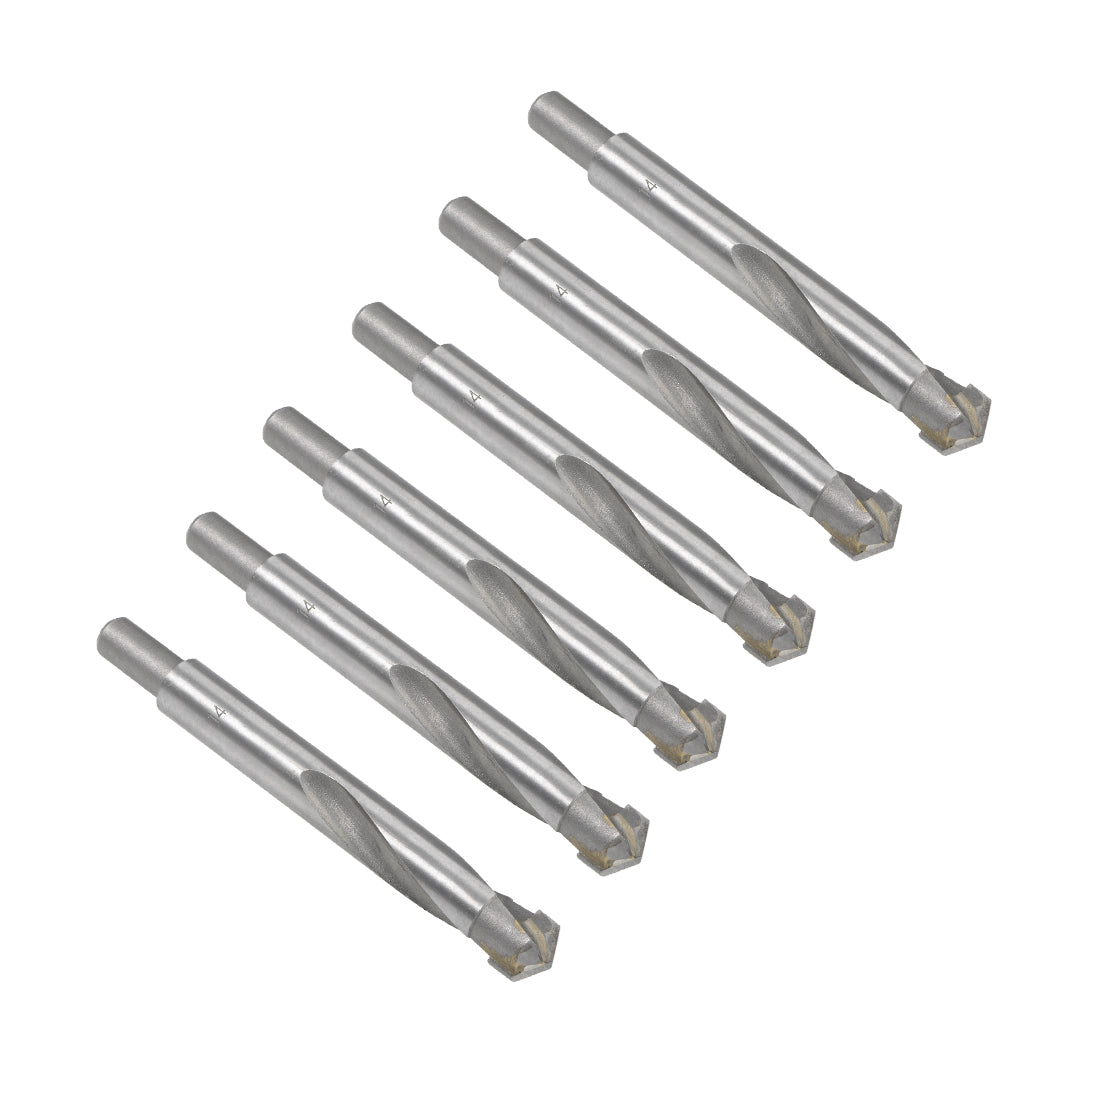 uxcell Uxcell 14mm Cemented Carbide Twist Drill Bits for Stainless Steel Copper Aluminum 6 Pcs